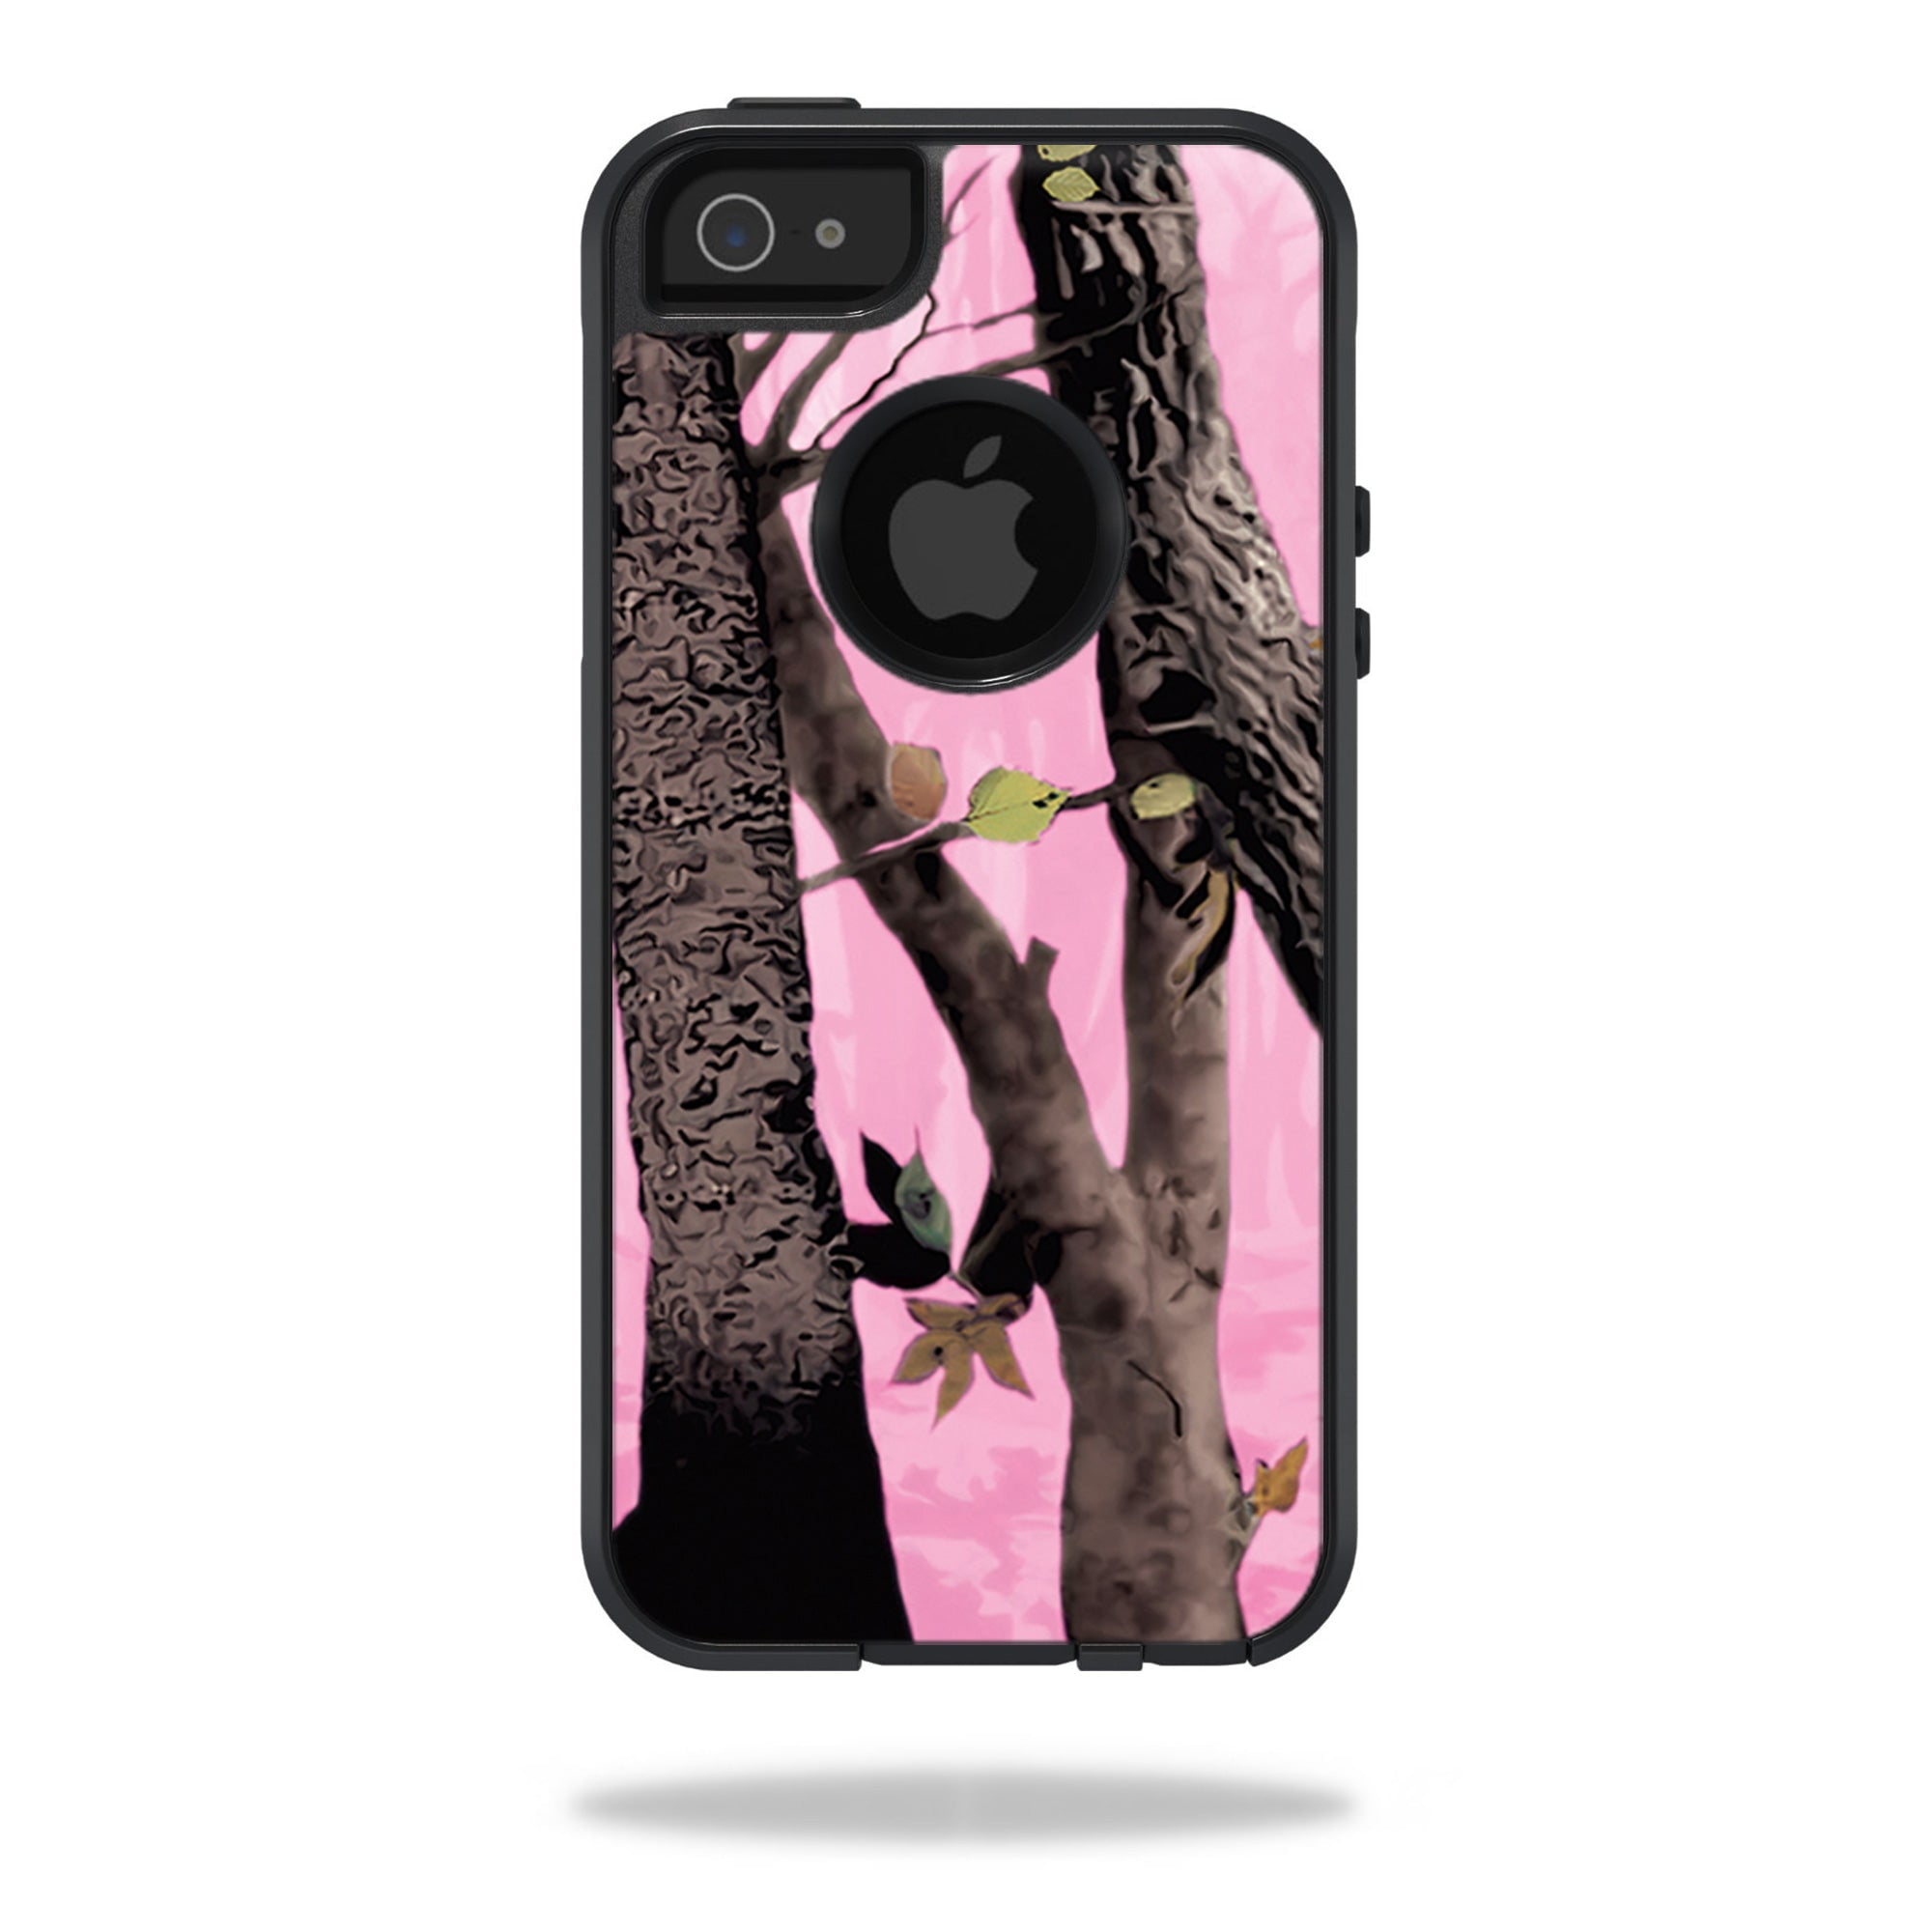 form Begivenhed jage Skin Decal Wrap Compatible With OtterBox Commuter iPhone 5/5s/SE Case Pink  Tree Camo - Walmart.com